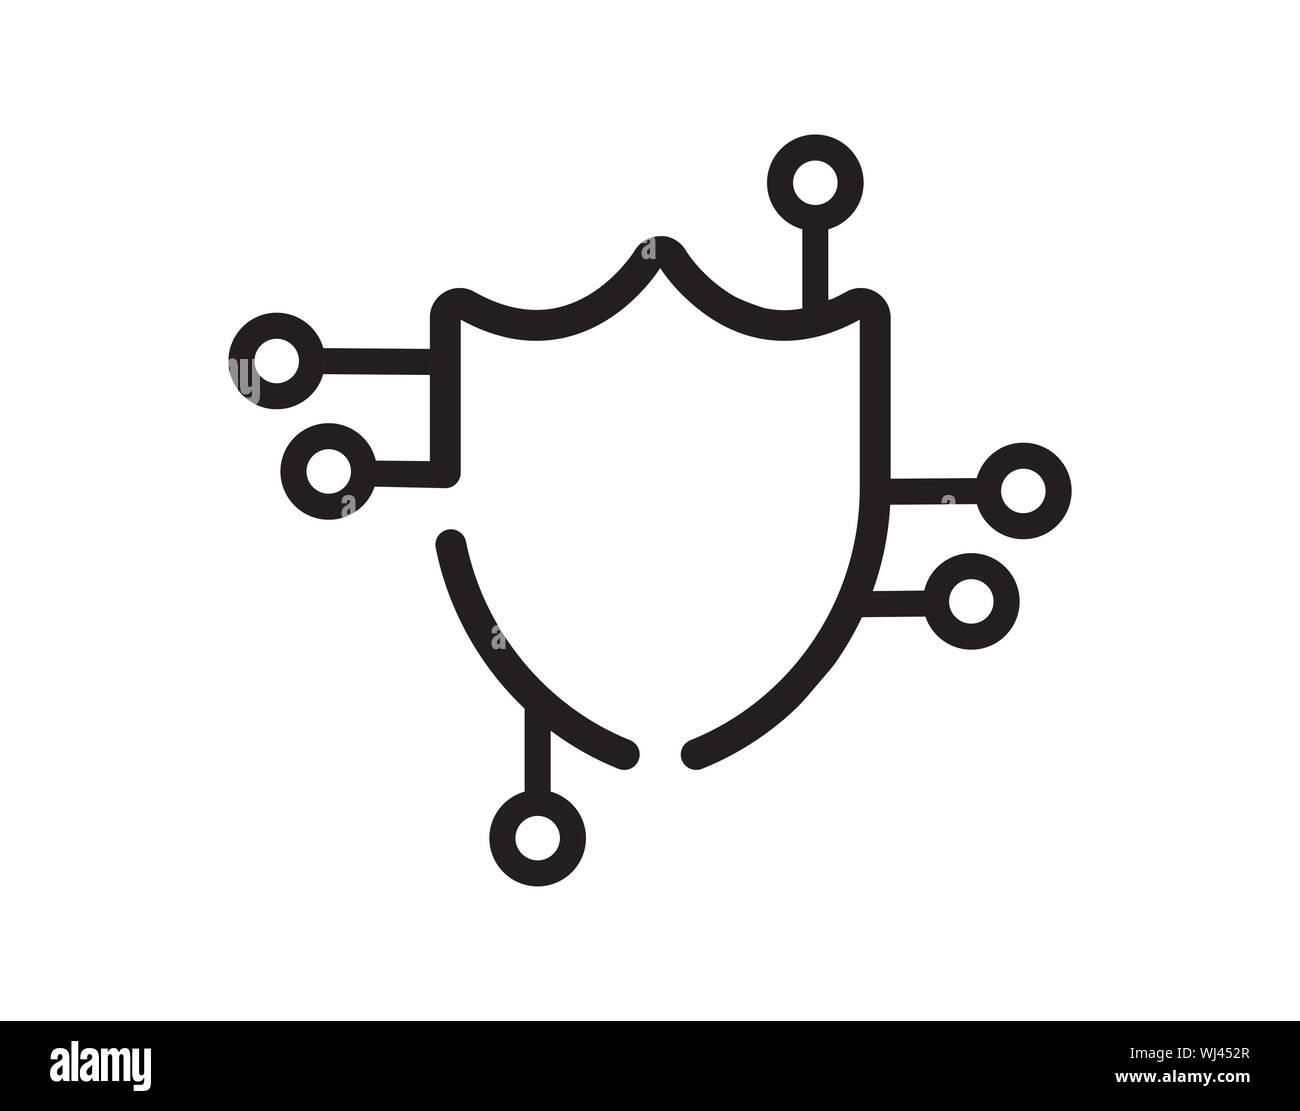 Cyber security logo with shield vector image Stock Vector